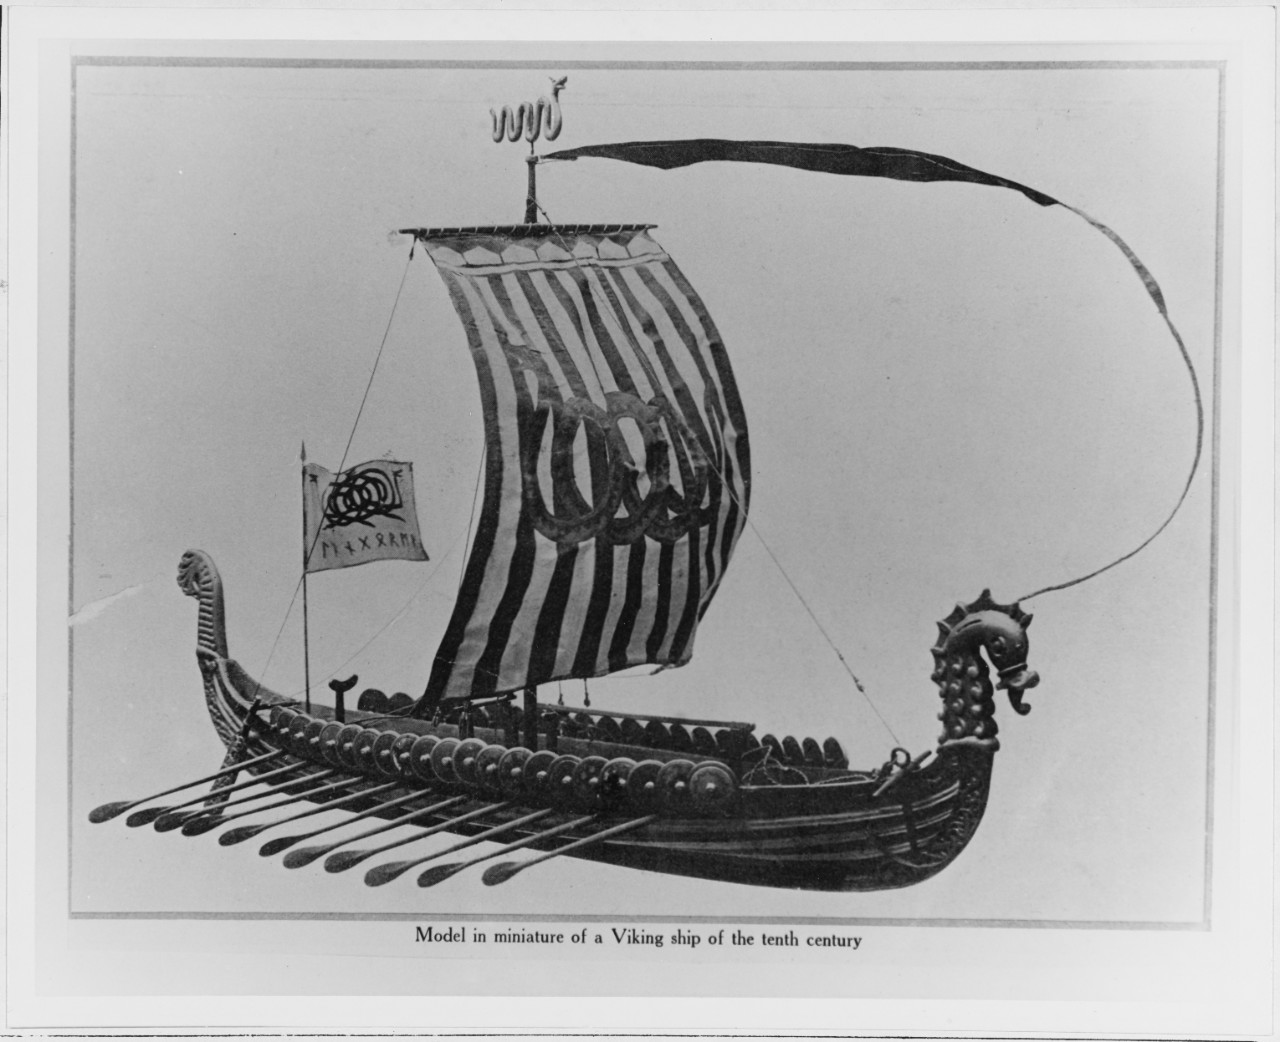 Model in miniature of a Viking Ship of the 10th Century